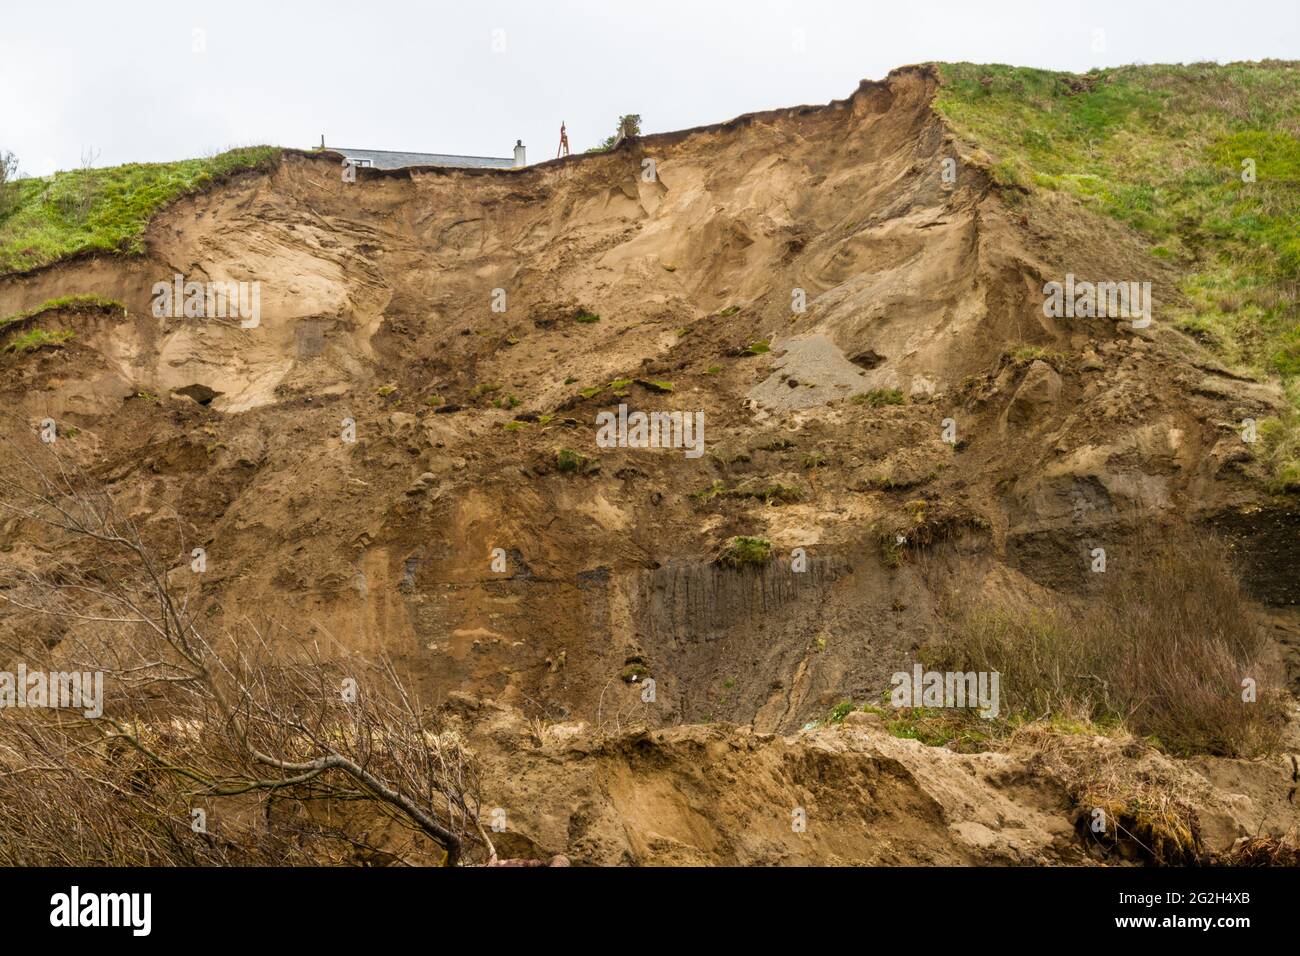 View from beach of the cliffs above the landslip at Nefyn, Llyn Peninsula, Wales, UK. This happened in April 2021, this image taken in May 2021, lands Stock Photo